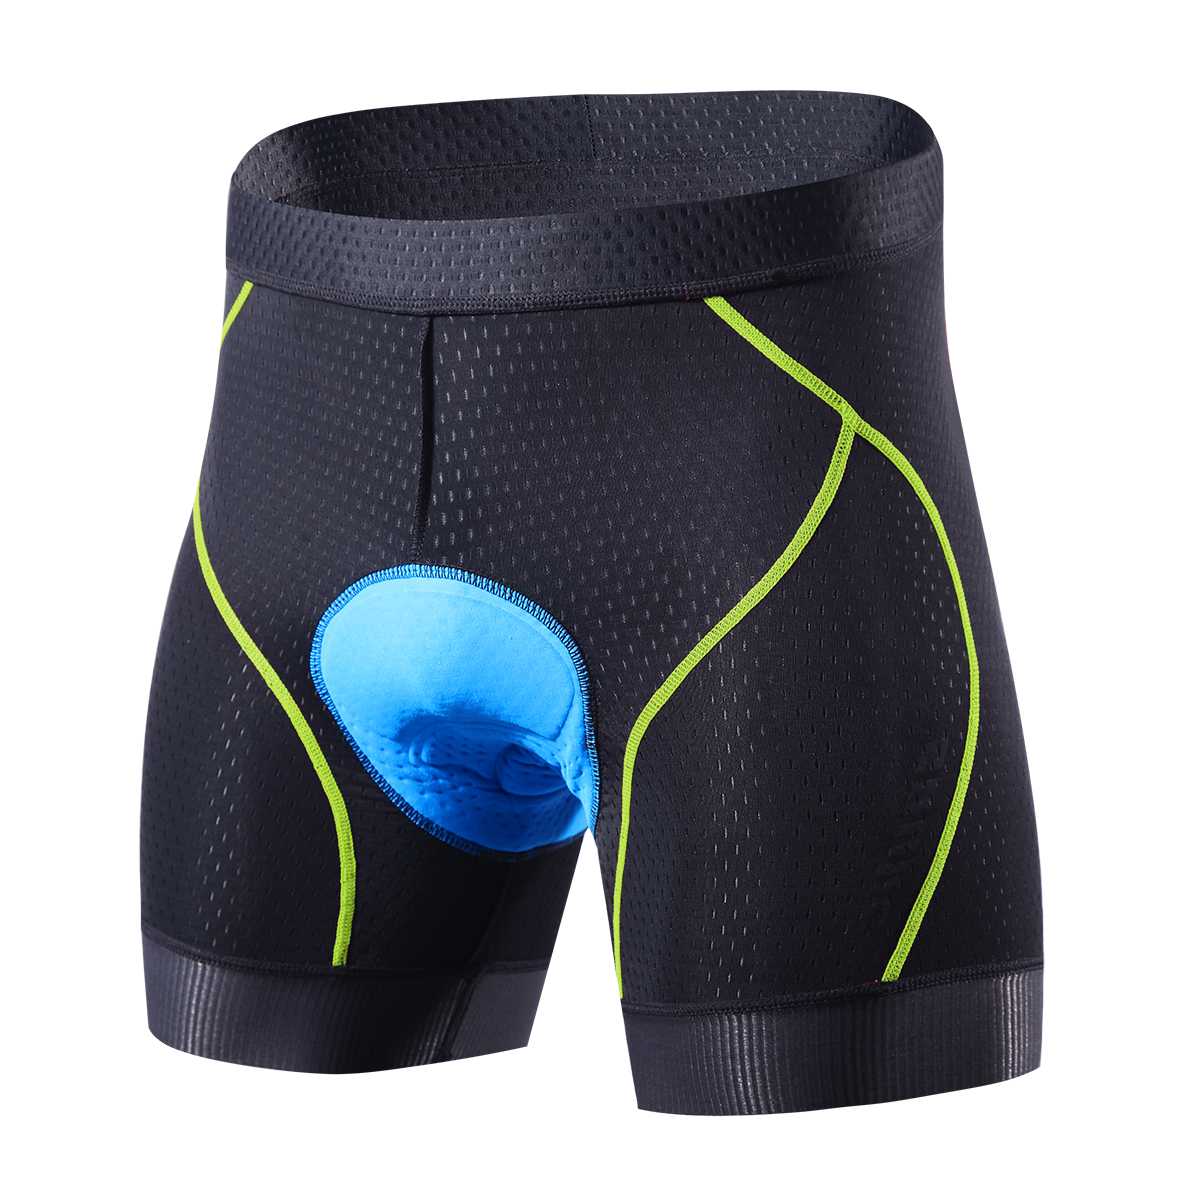 Souke Sports Men's Eco-Daily 4D Padded Bicycle Shorts-PS6018-Green (6544512254065)